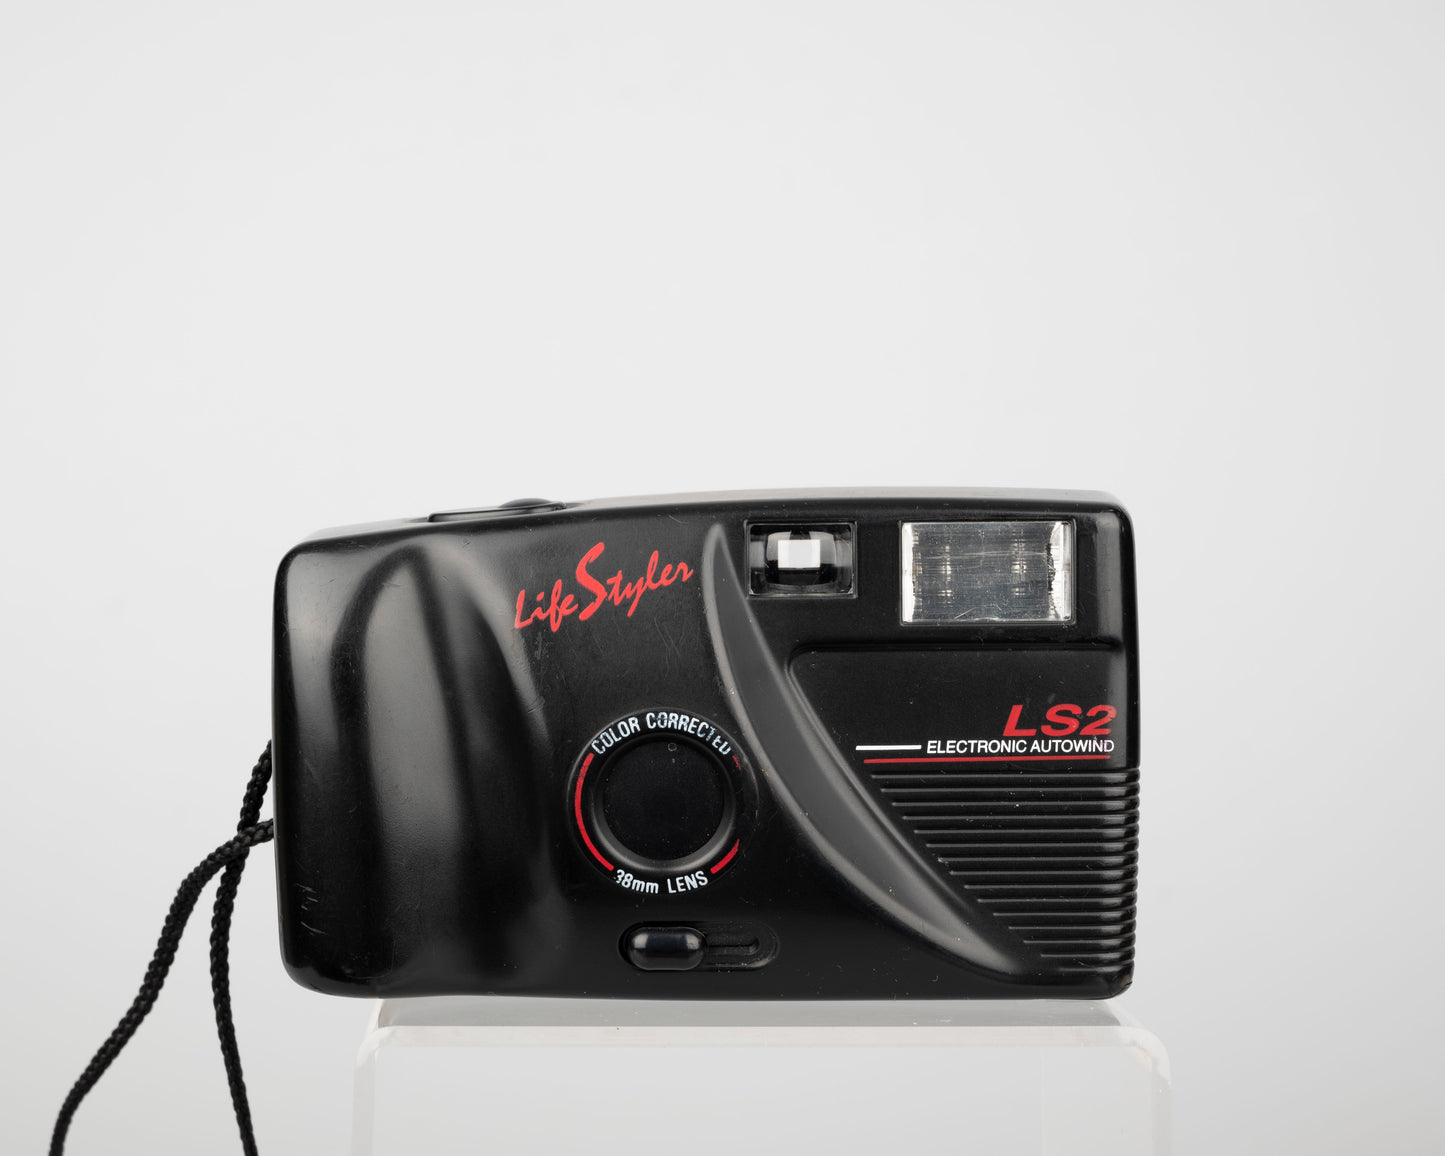 LifeStyles LS2 Electronic Autowind 35mm film camera